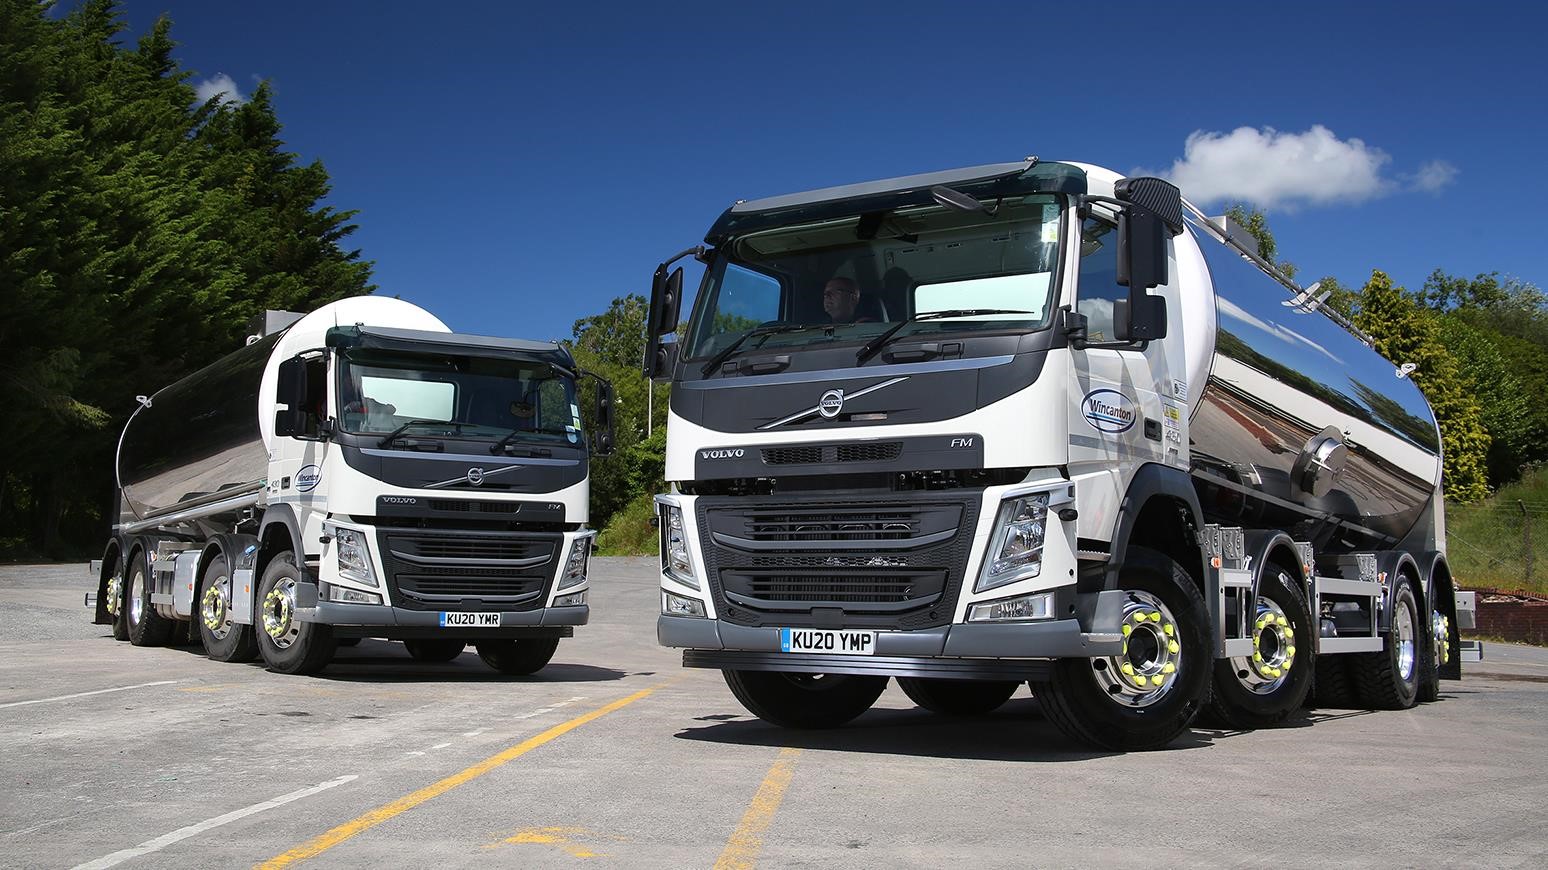 Wiltshire-Based Wincanton Group Leases Two Volvo FM 8x2 Tanker Trucks For Milk Collection In South Wales